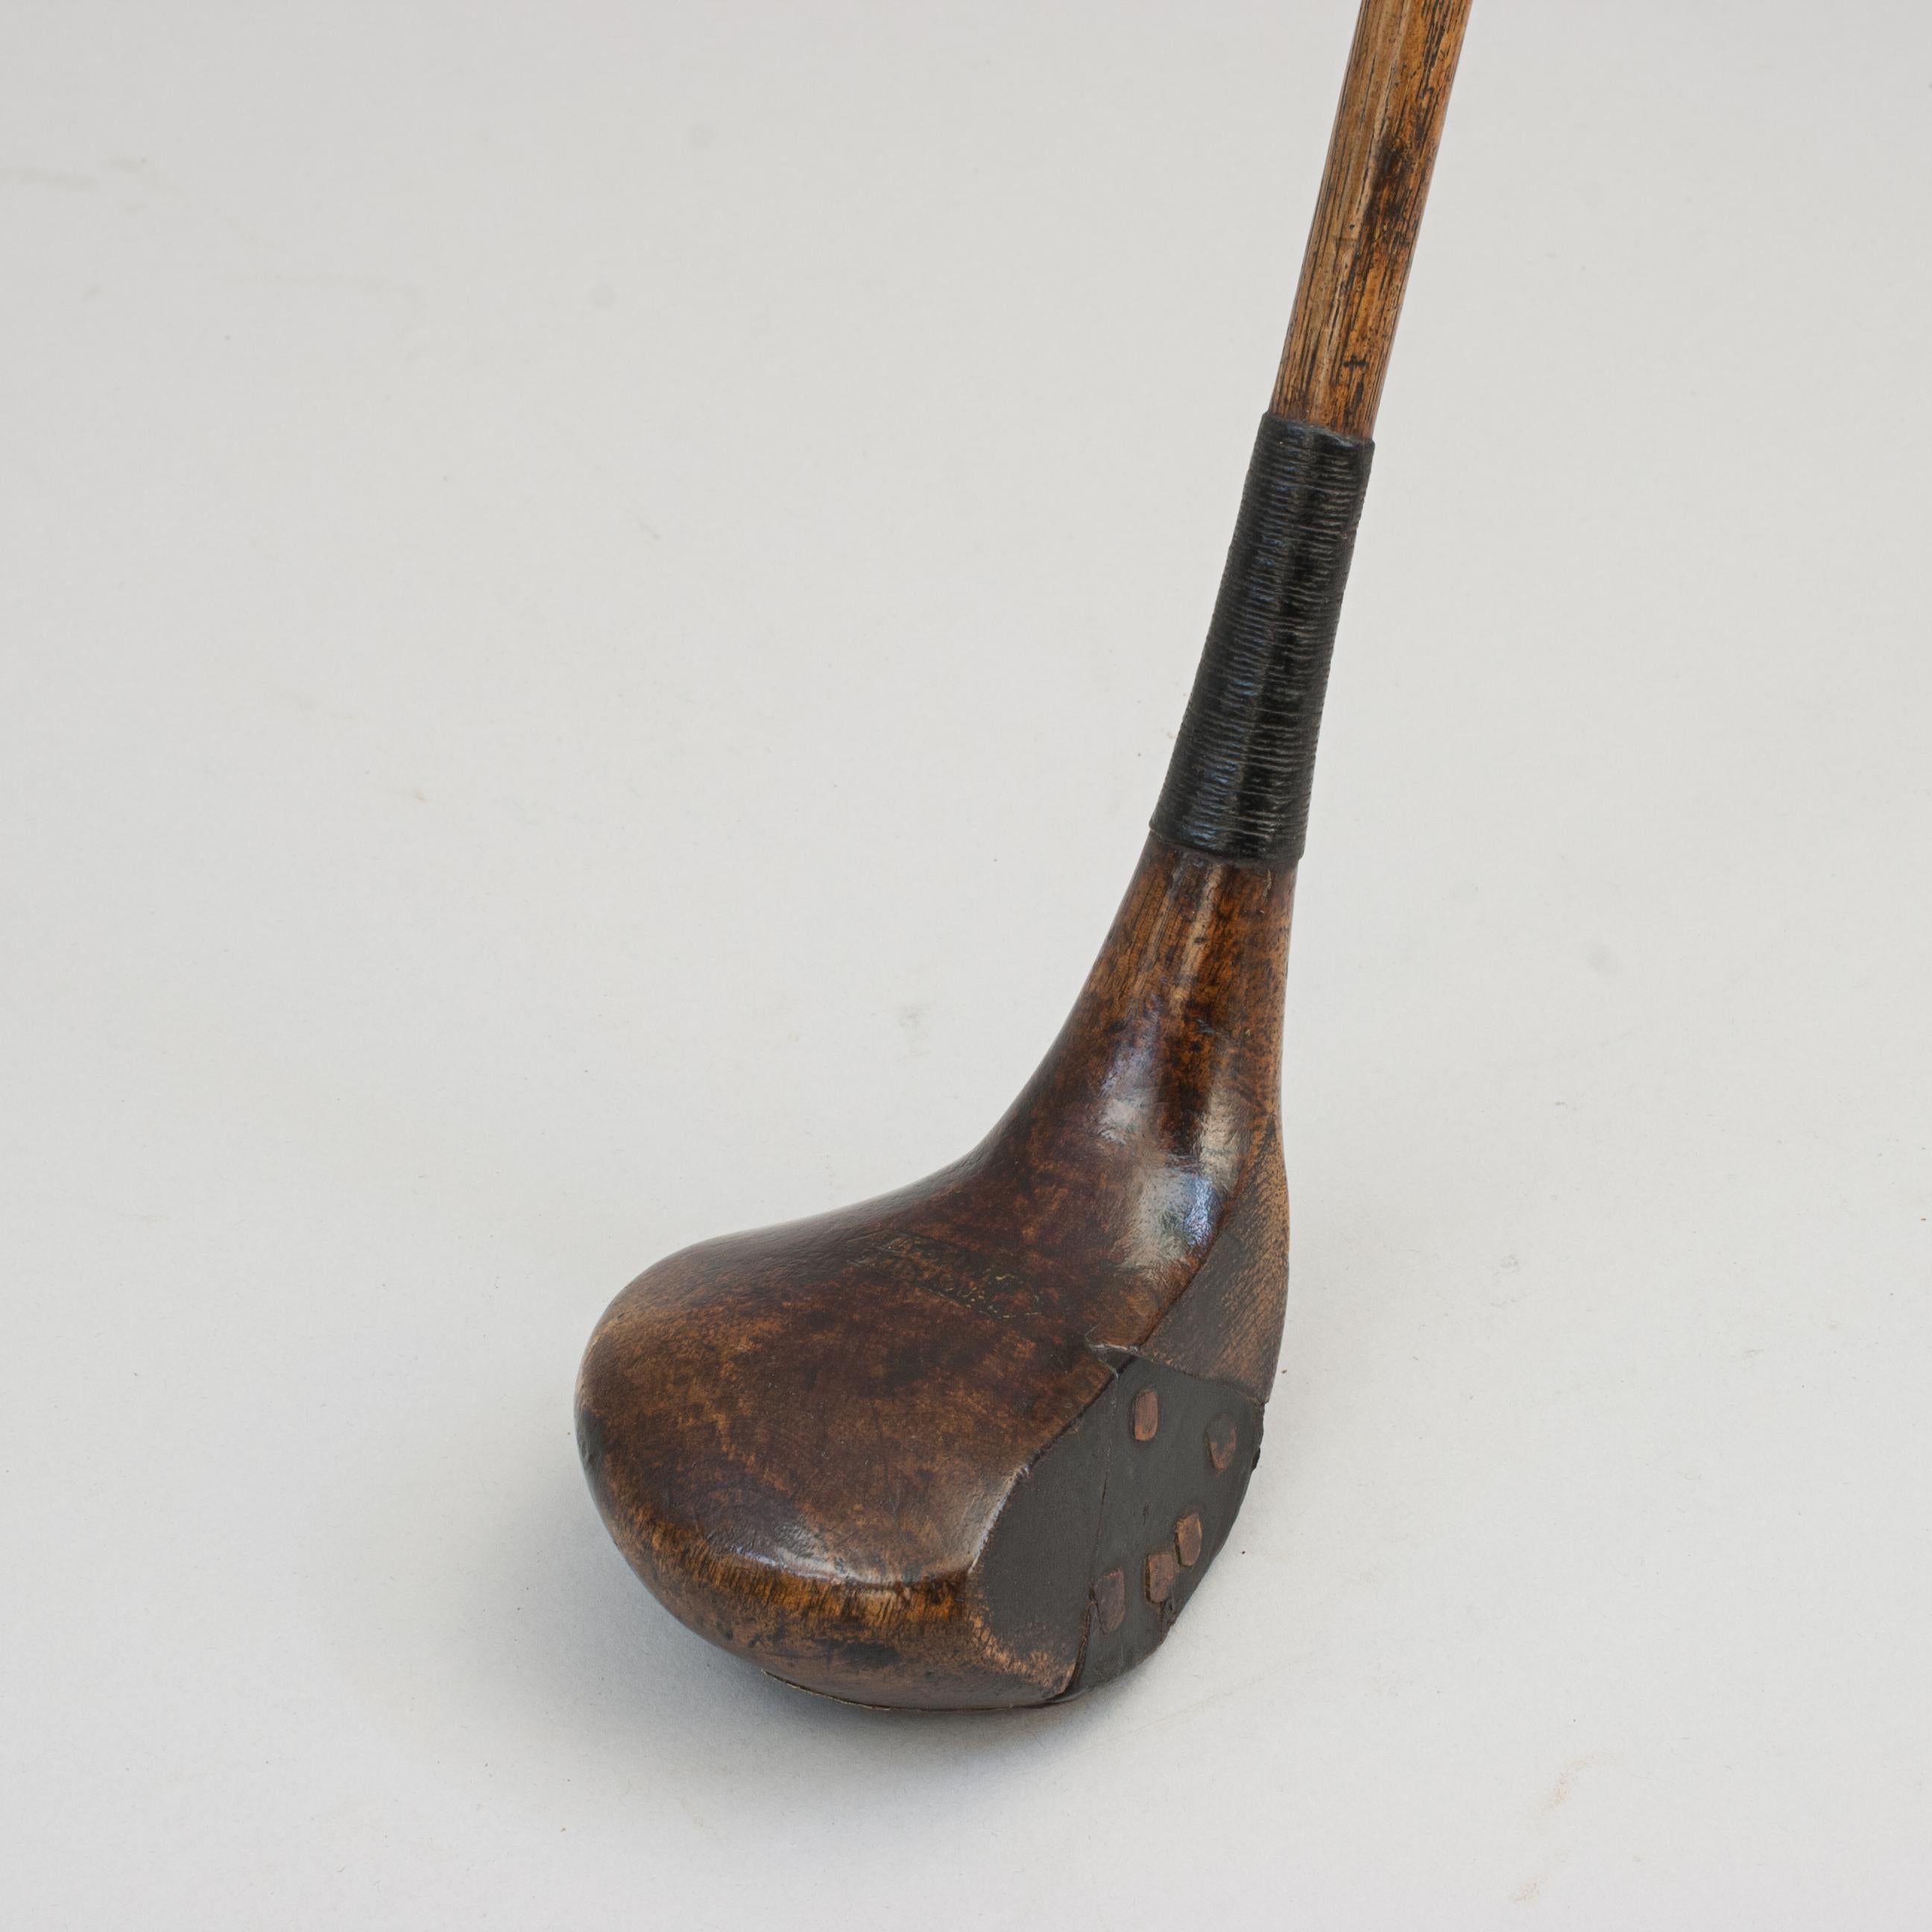 Antique Golf Club, Brassie (Fairway Wood).
Persimmon head socket head brassie/spoon with hickory shaft and a leather grip. The head is possibly stamped 'Jersy Hill, Harrogate', face with insert fitted with wooden pegs, a full brass sole plate